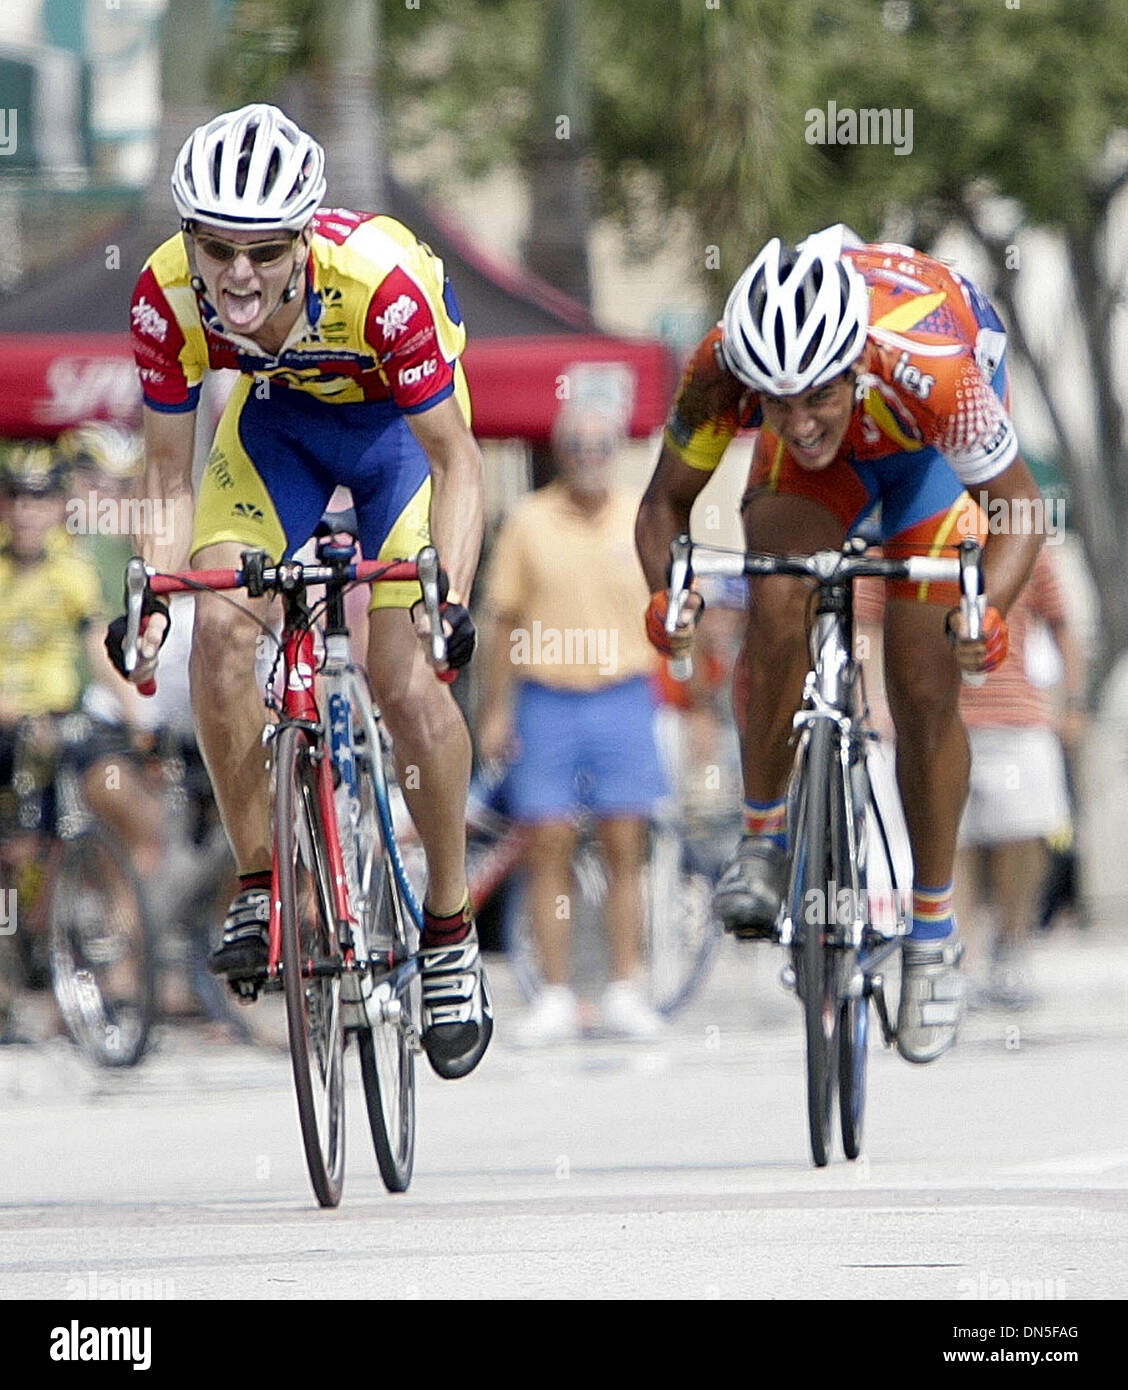 Sep 30, 2006; Lake Worth, FL, USA; Bicycle Show & Shine Downtown Lake Worth took place this afternoon in Lake Worth, Saturday, September 30, 2006. Victor Alber (left), riding for Bill Bone Bicyclery edged out second place finisher Miguel Hernandez (right), riding for l.aser-es in this afternoon's Men's Category 5 race. Mandatory Credit: Photo by Thomas Cordy/Palm Beach Post/ZUMA Pr Stock Photo